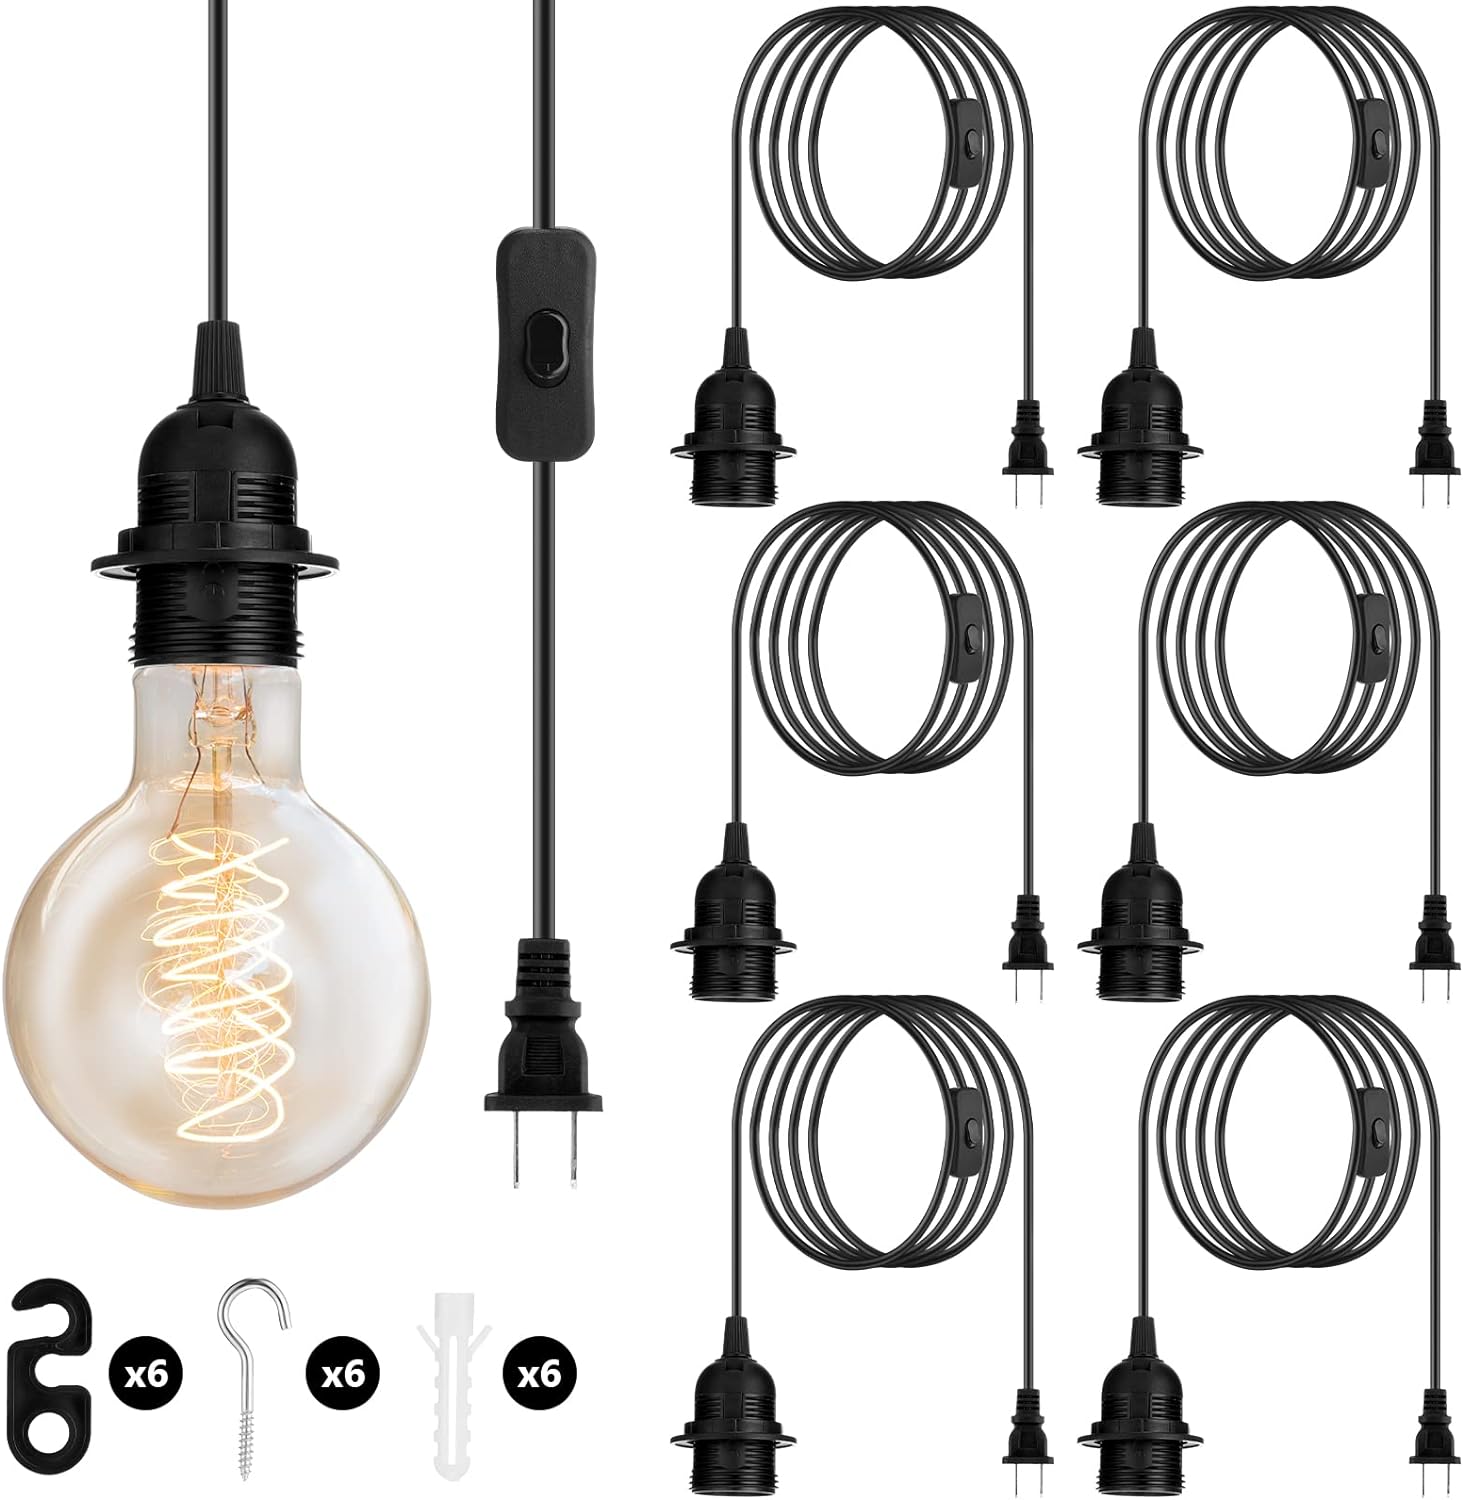 Reginary 6 Pieces Hanging Light Cord Kit Review